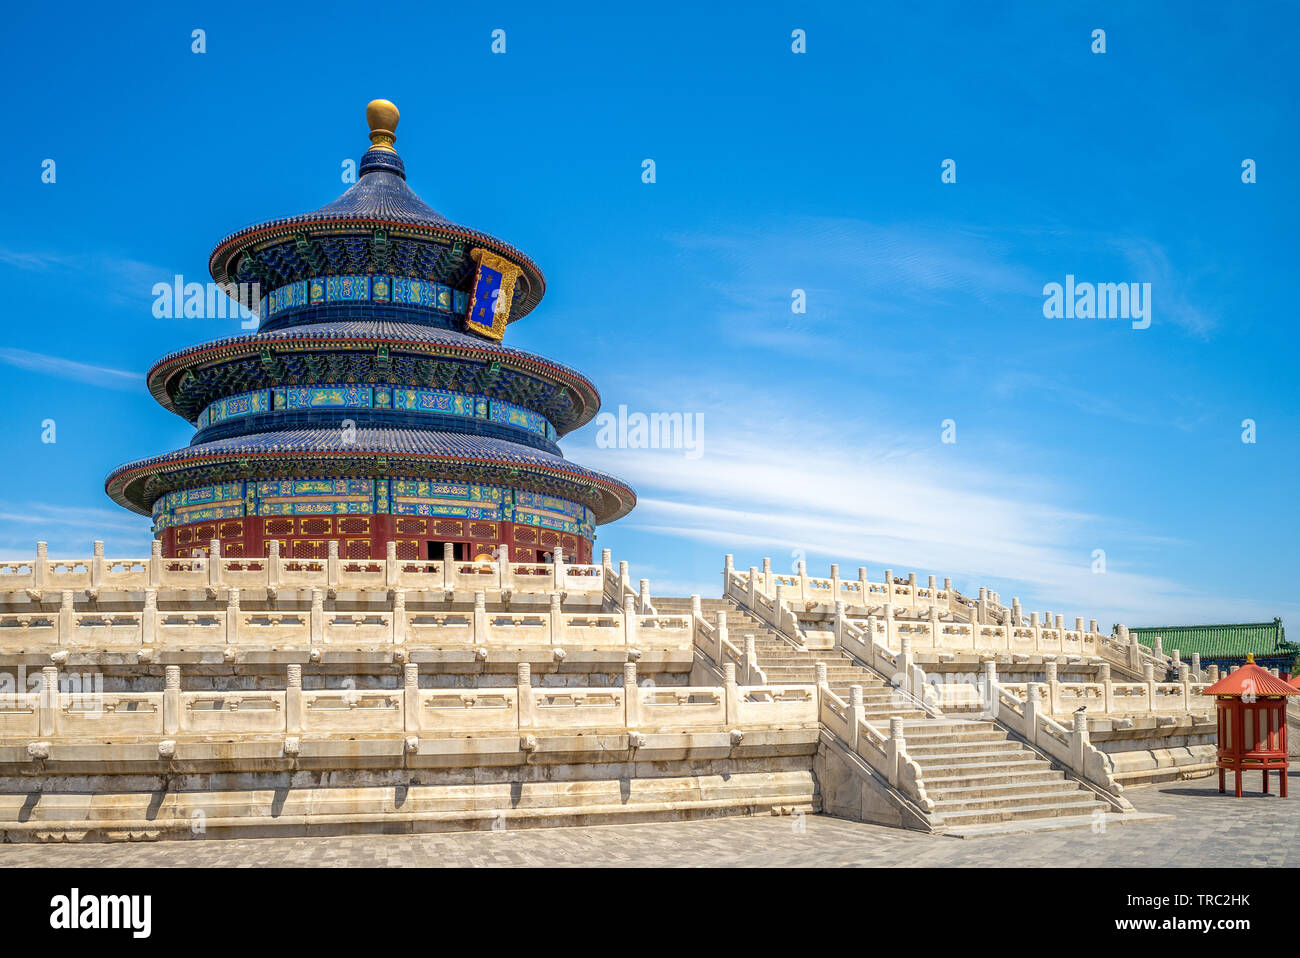 Temple of Heaven, the landmark of beijing, china. the chinese ...